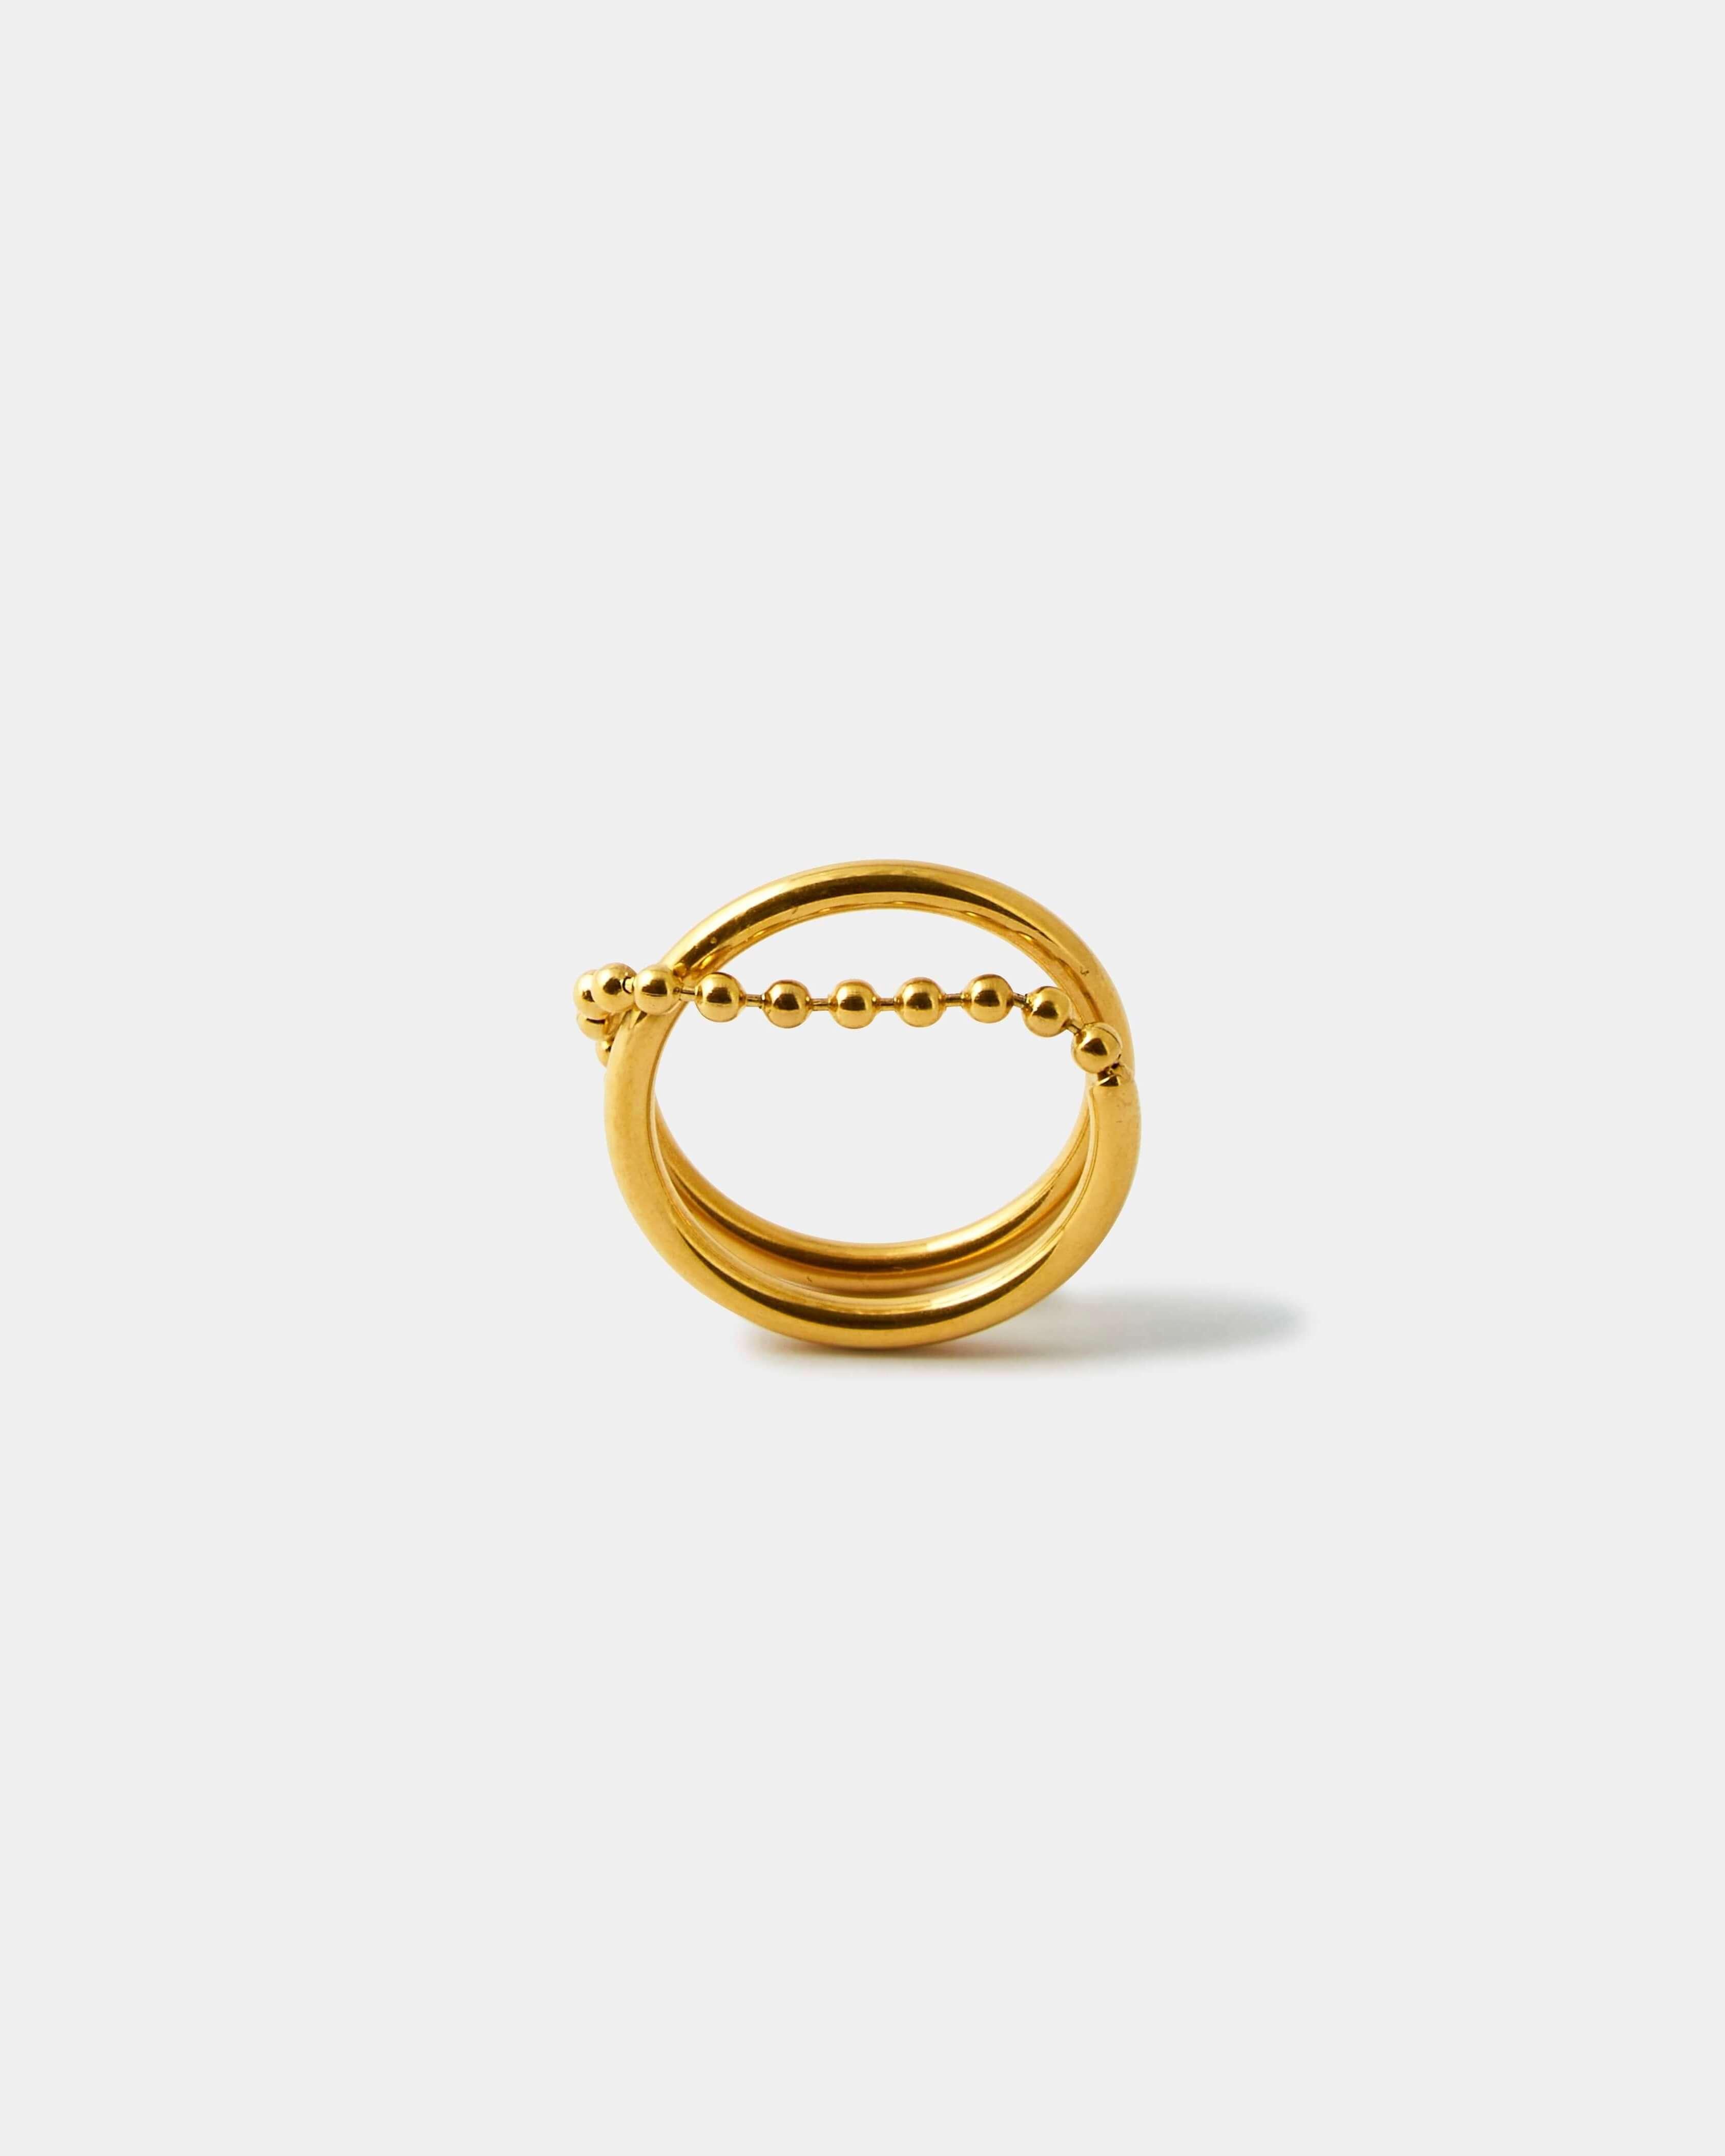 DOUBLE LAYER BEADS RING - LIMELY